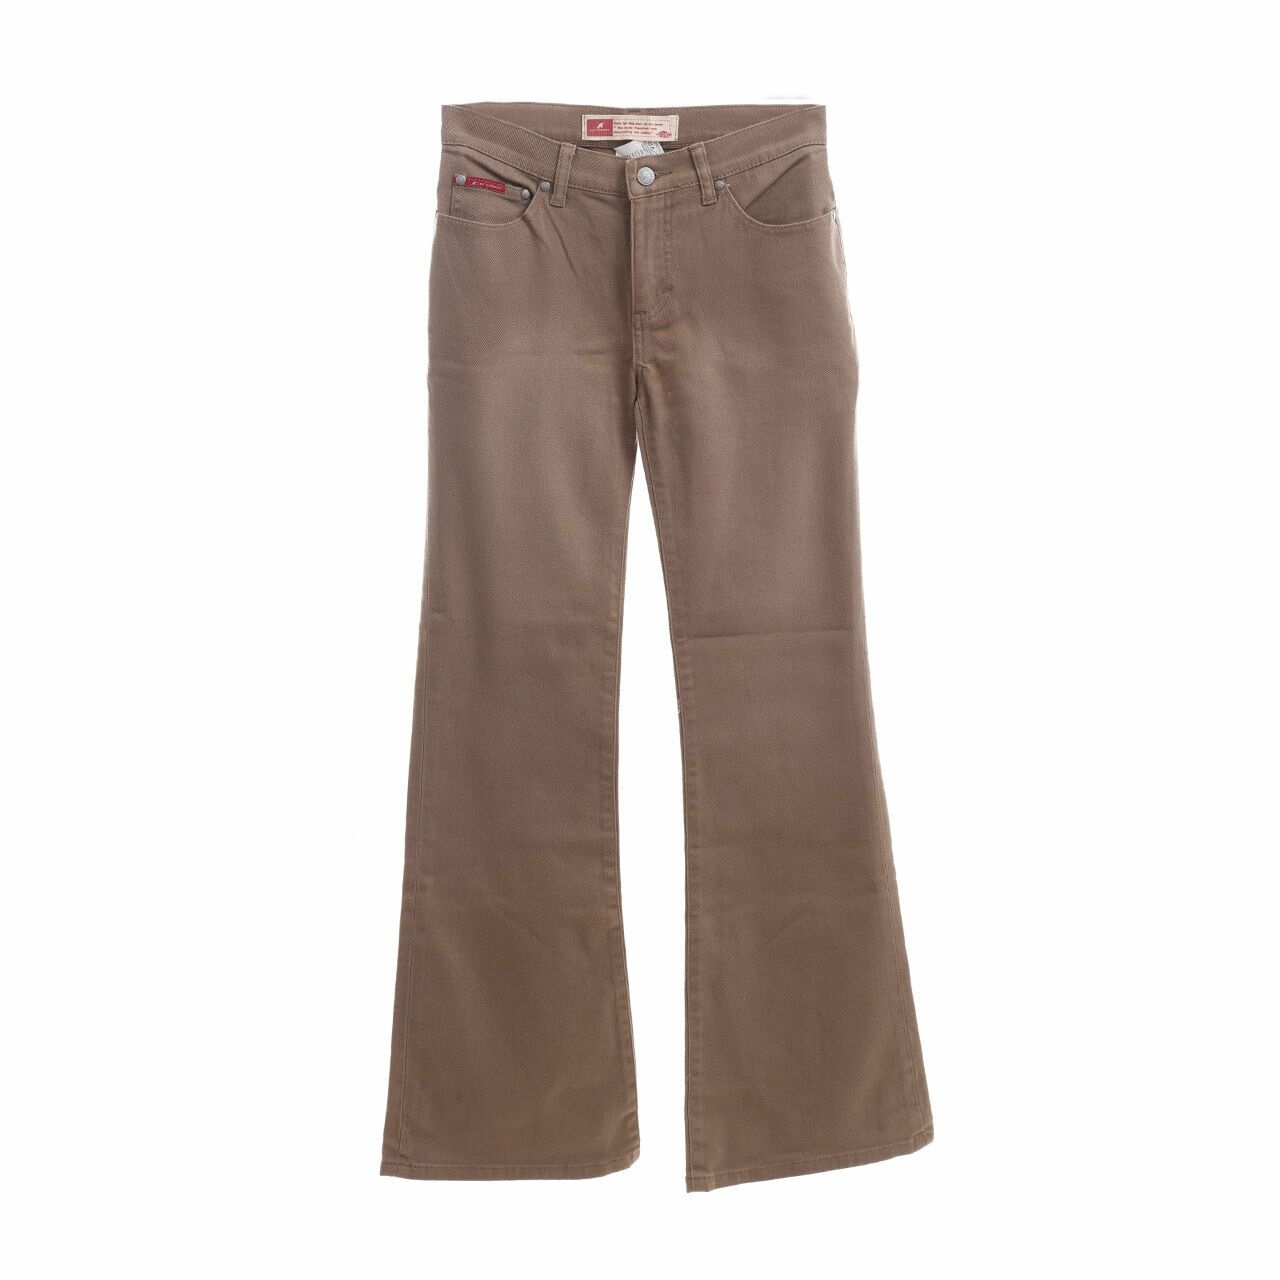 Lee Cooper Taupe Long Pants